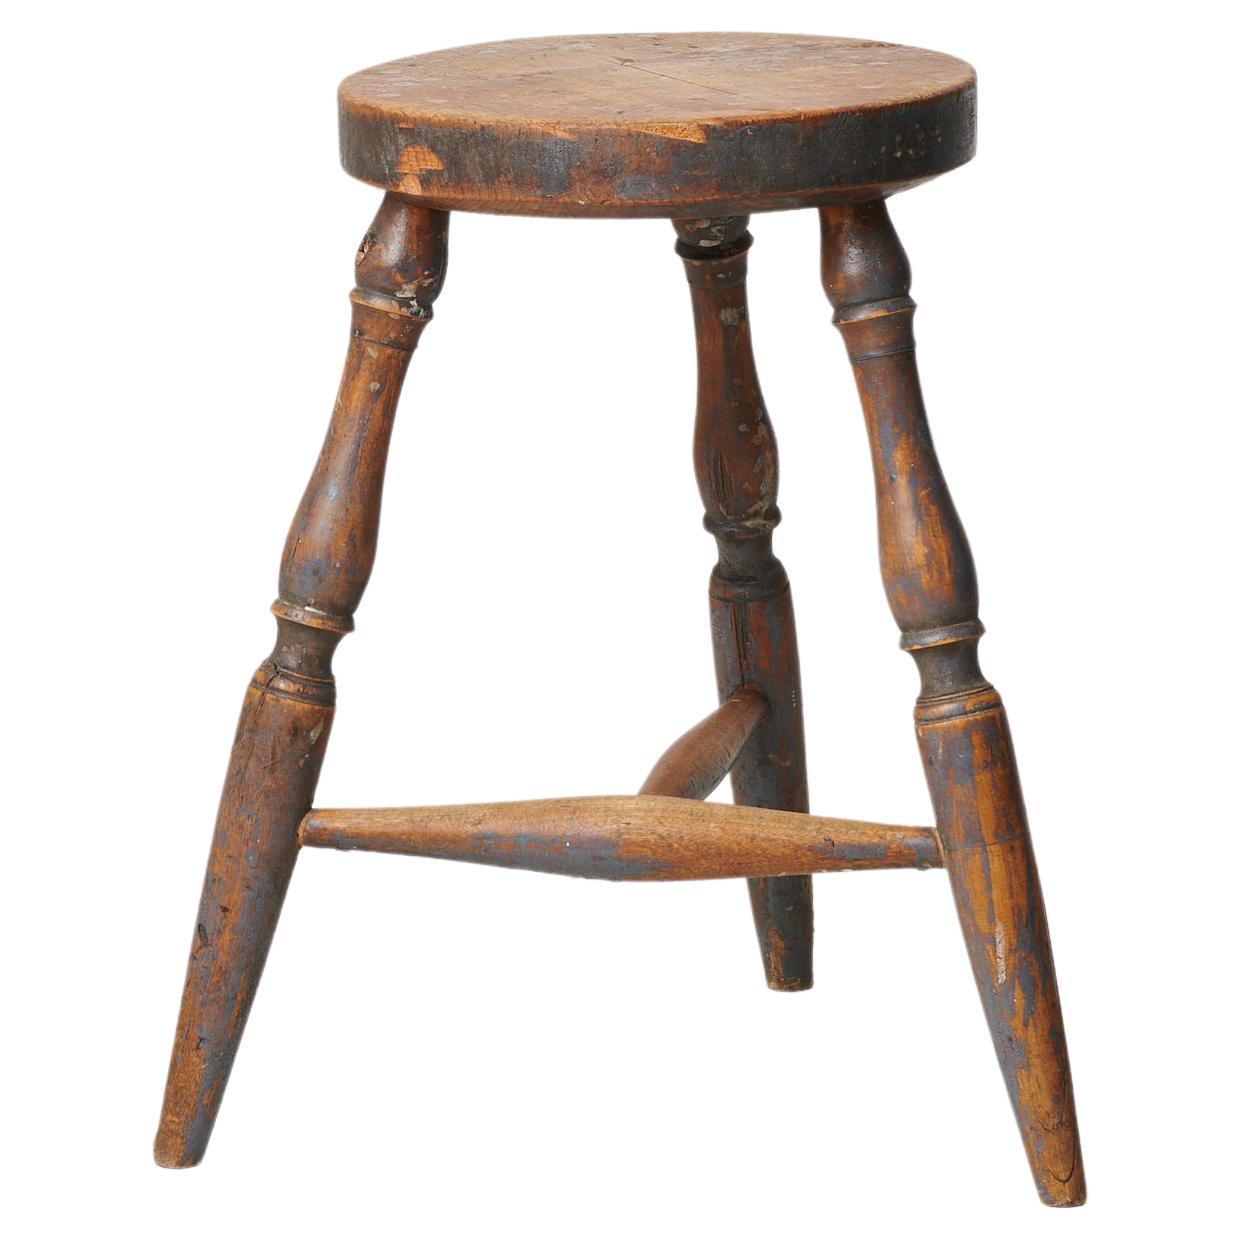 Antique Swedish Rustic Country Folk Art Stool For Sale